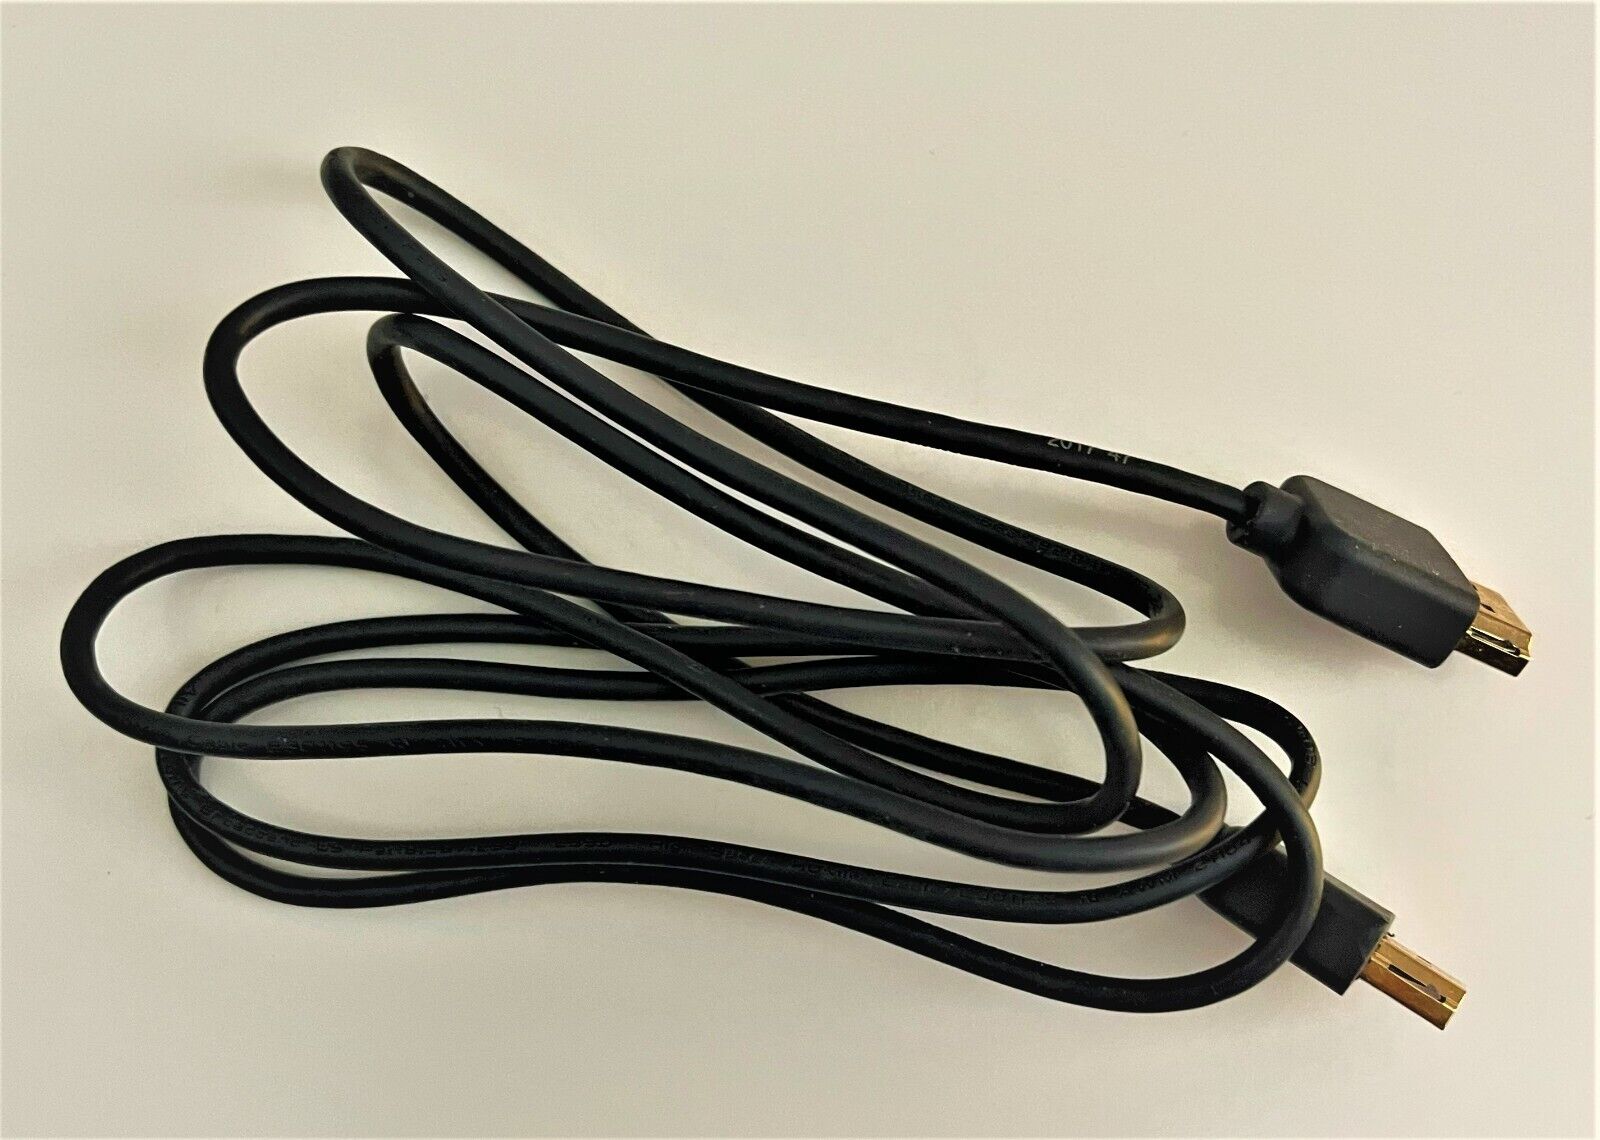 HDMI Cable ~ 54 in. Length:  # 2017 47:  Excellent Working Condition